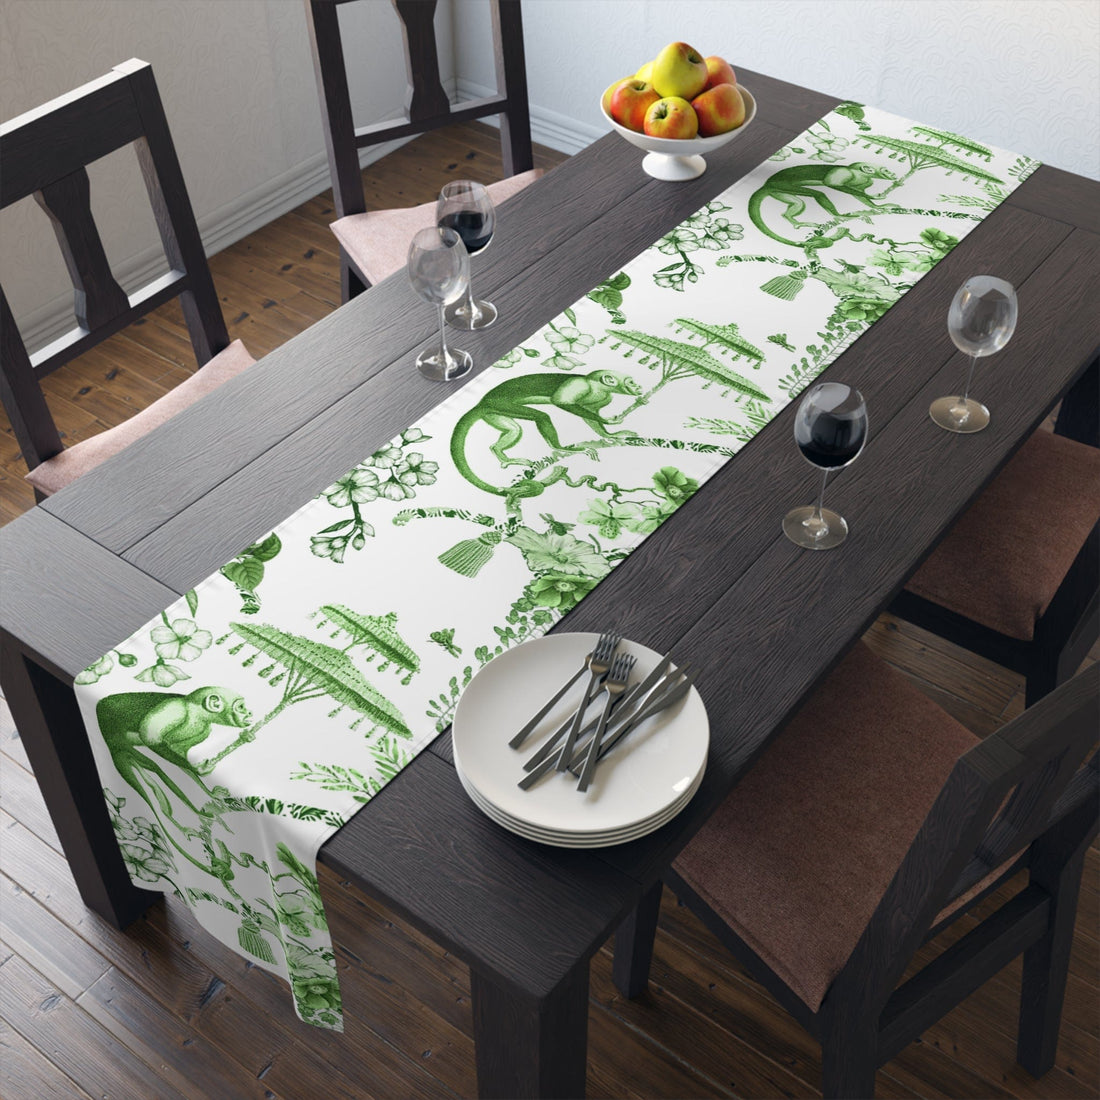 Kate McEnroe New York Chinoiserie Botanical Toile Table Runner, Floral Green, White Chinoiserie Jungle, Country Farmhouse Grandmillenial Table DecorTable Runners33300911032699350133